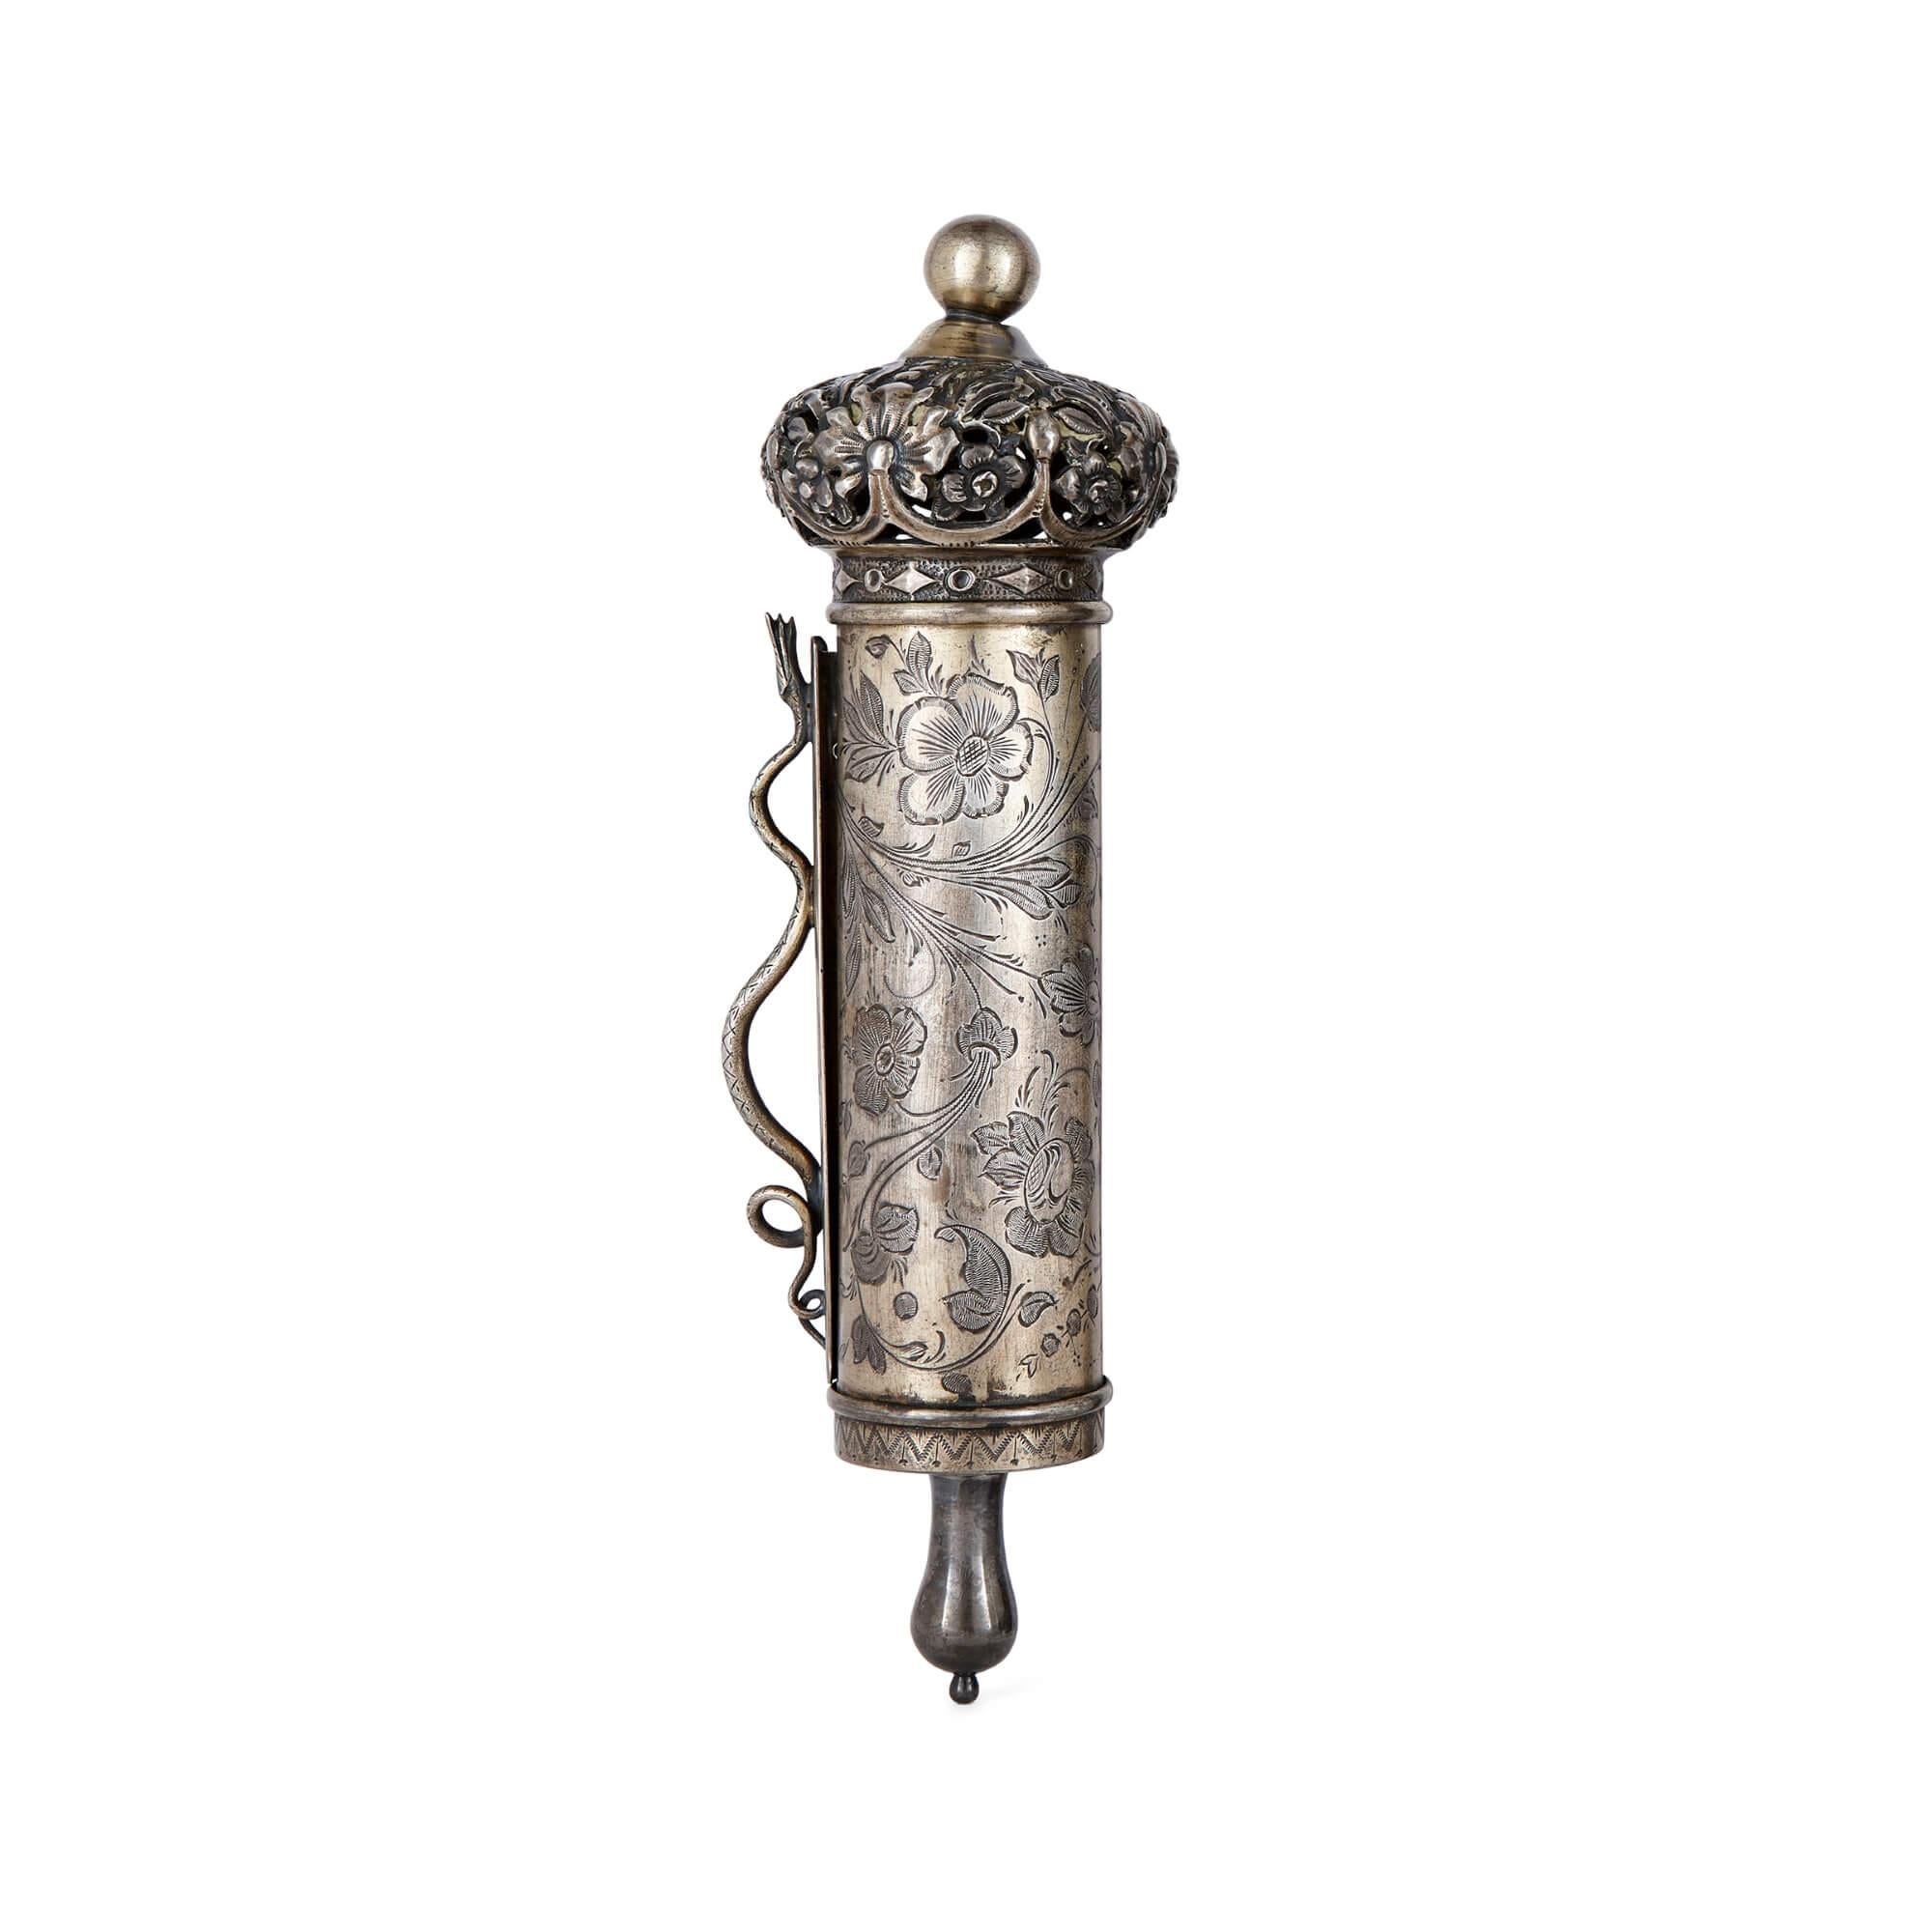 A large Russian silver Jewish Megillah case and scroll
Russian, 19th century
Measures: height 23cm, diameter 7cm

This remarkable piece is a Russian Judaica Megillah scroll and case, relatively large for its size, made with beautifully crafted